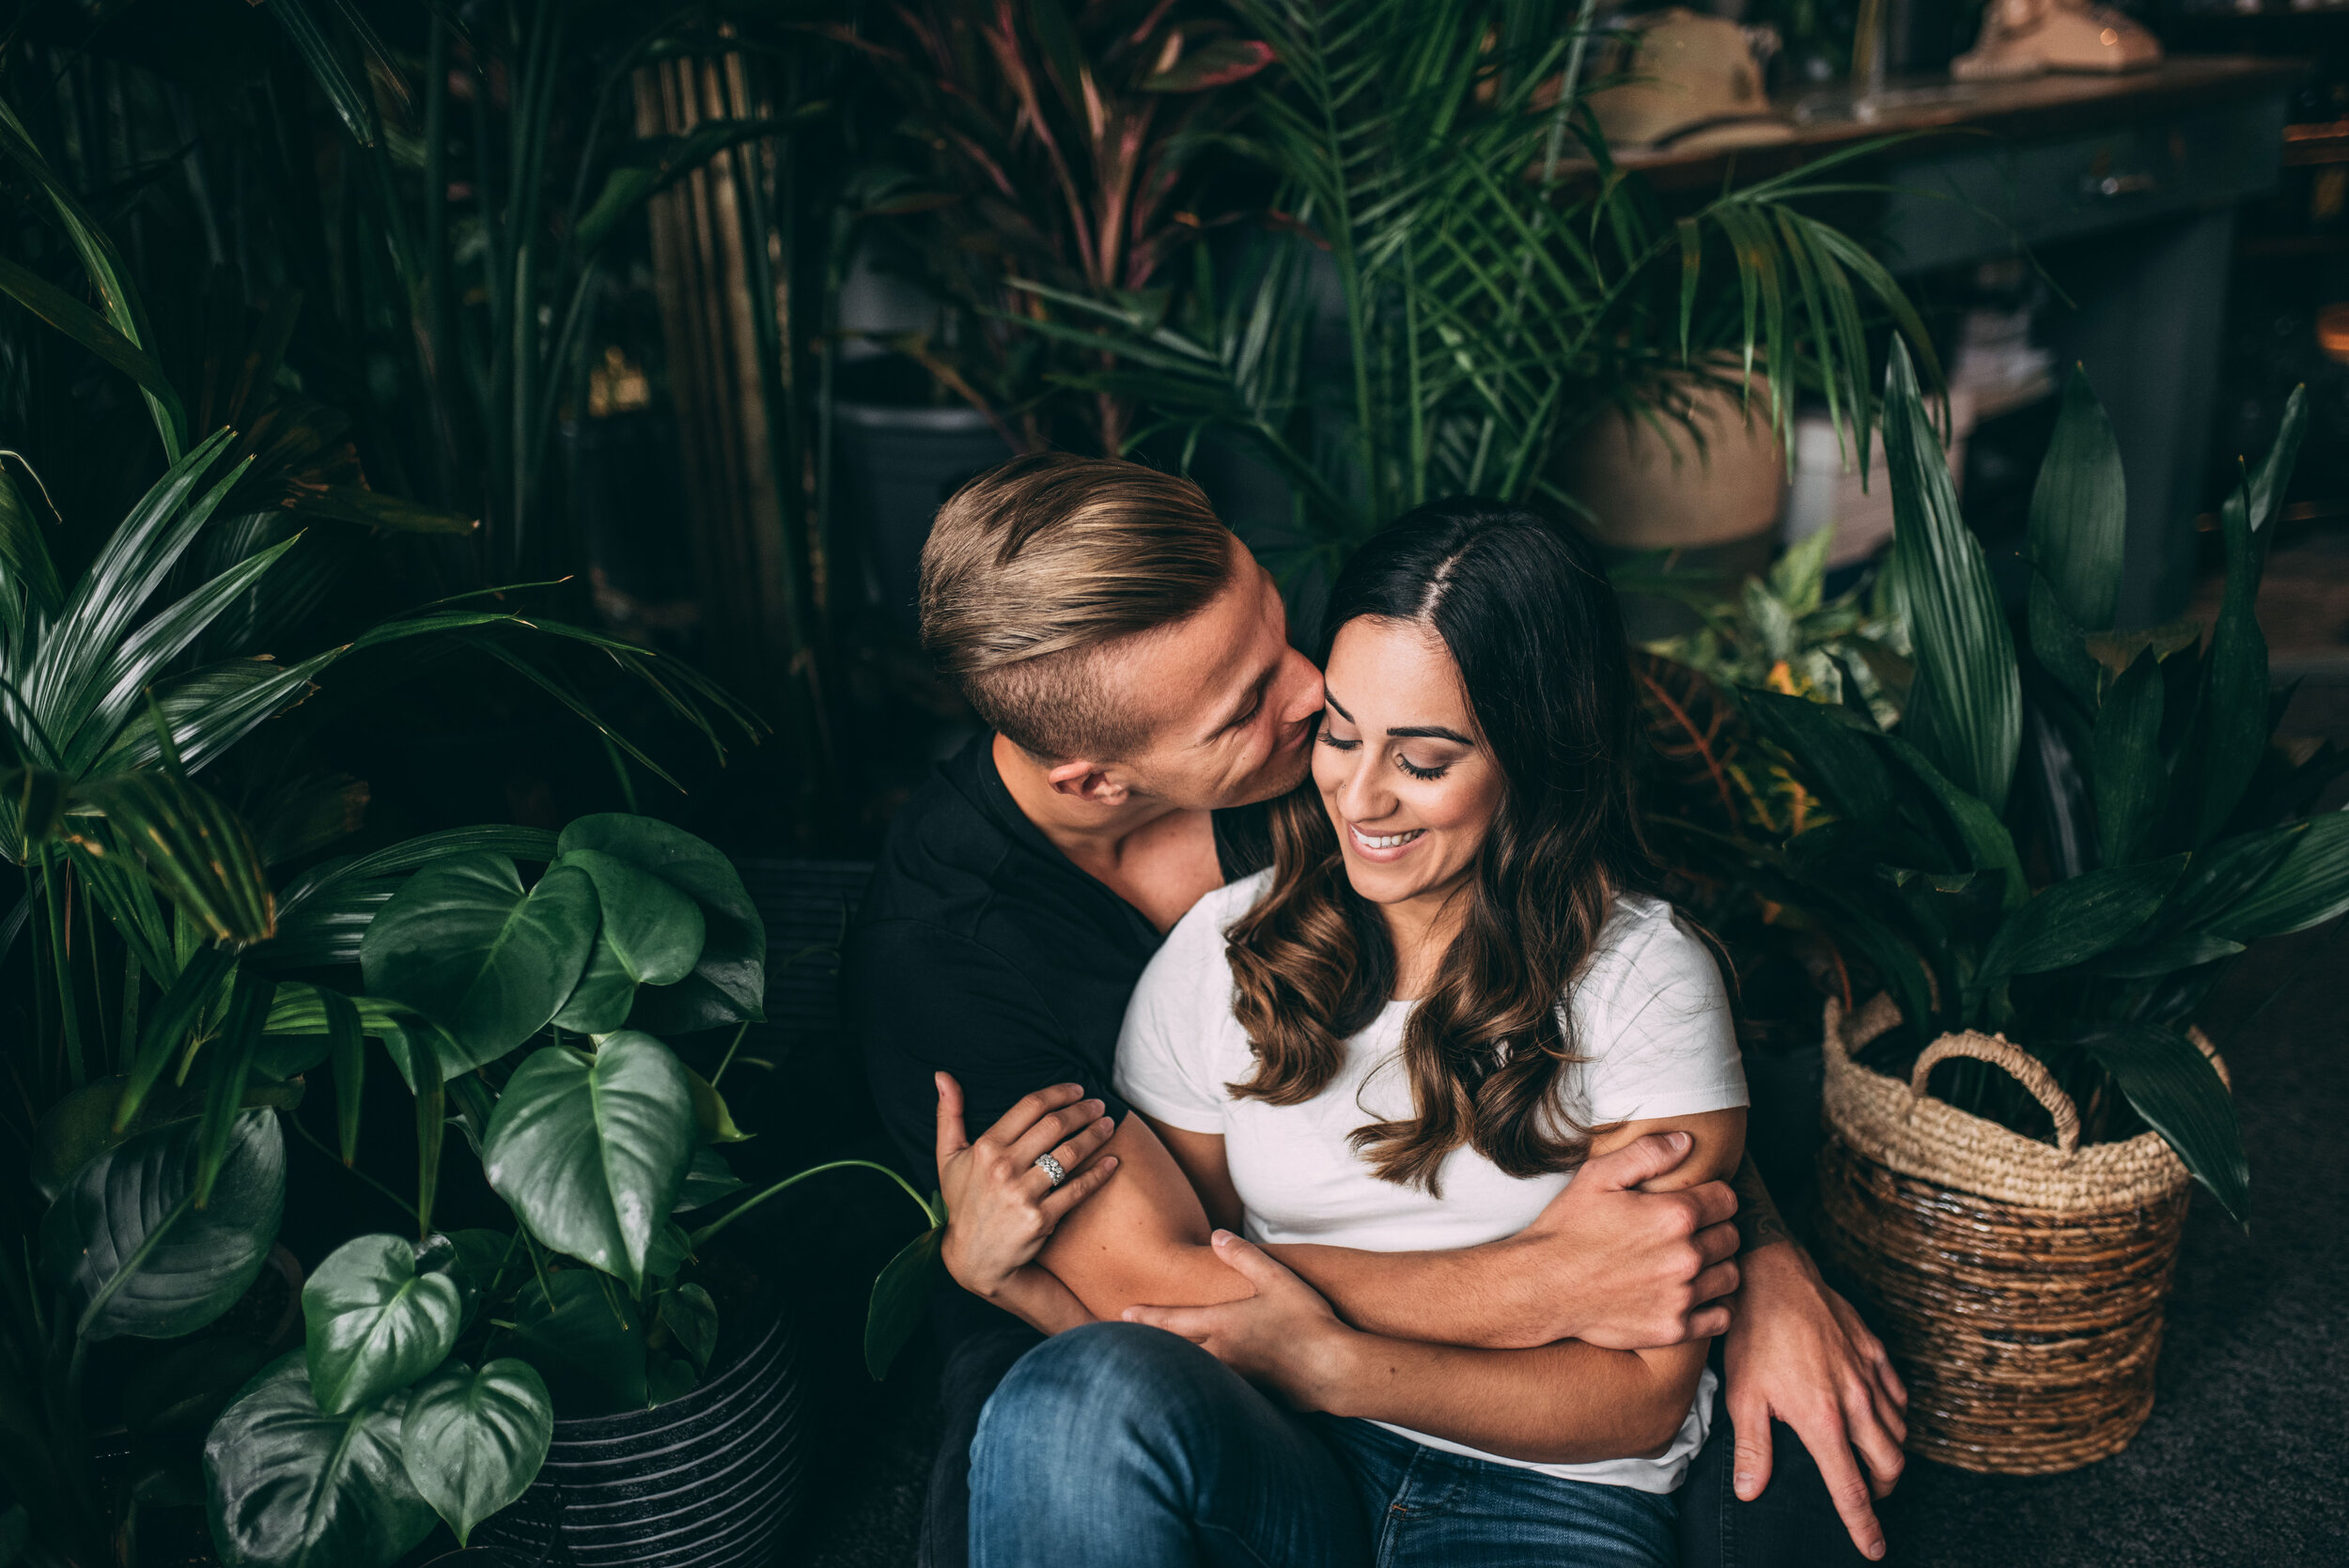 Vancouver Engagement Session - In Home Couples Session - Loft Garden Oasis - Laura Olson Photography - Sunshine Coast BC & Vancouver Wedding & Elopement Photographer8107.jpg